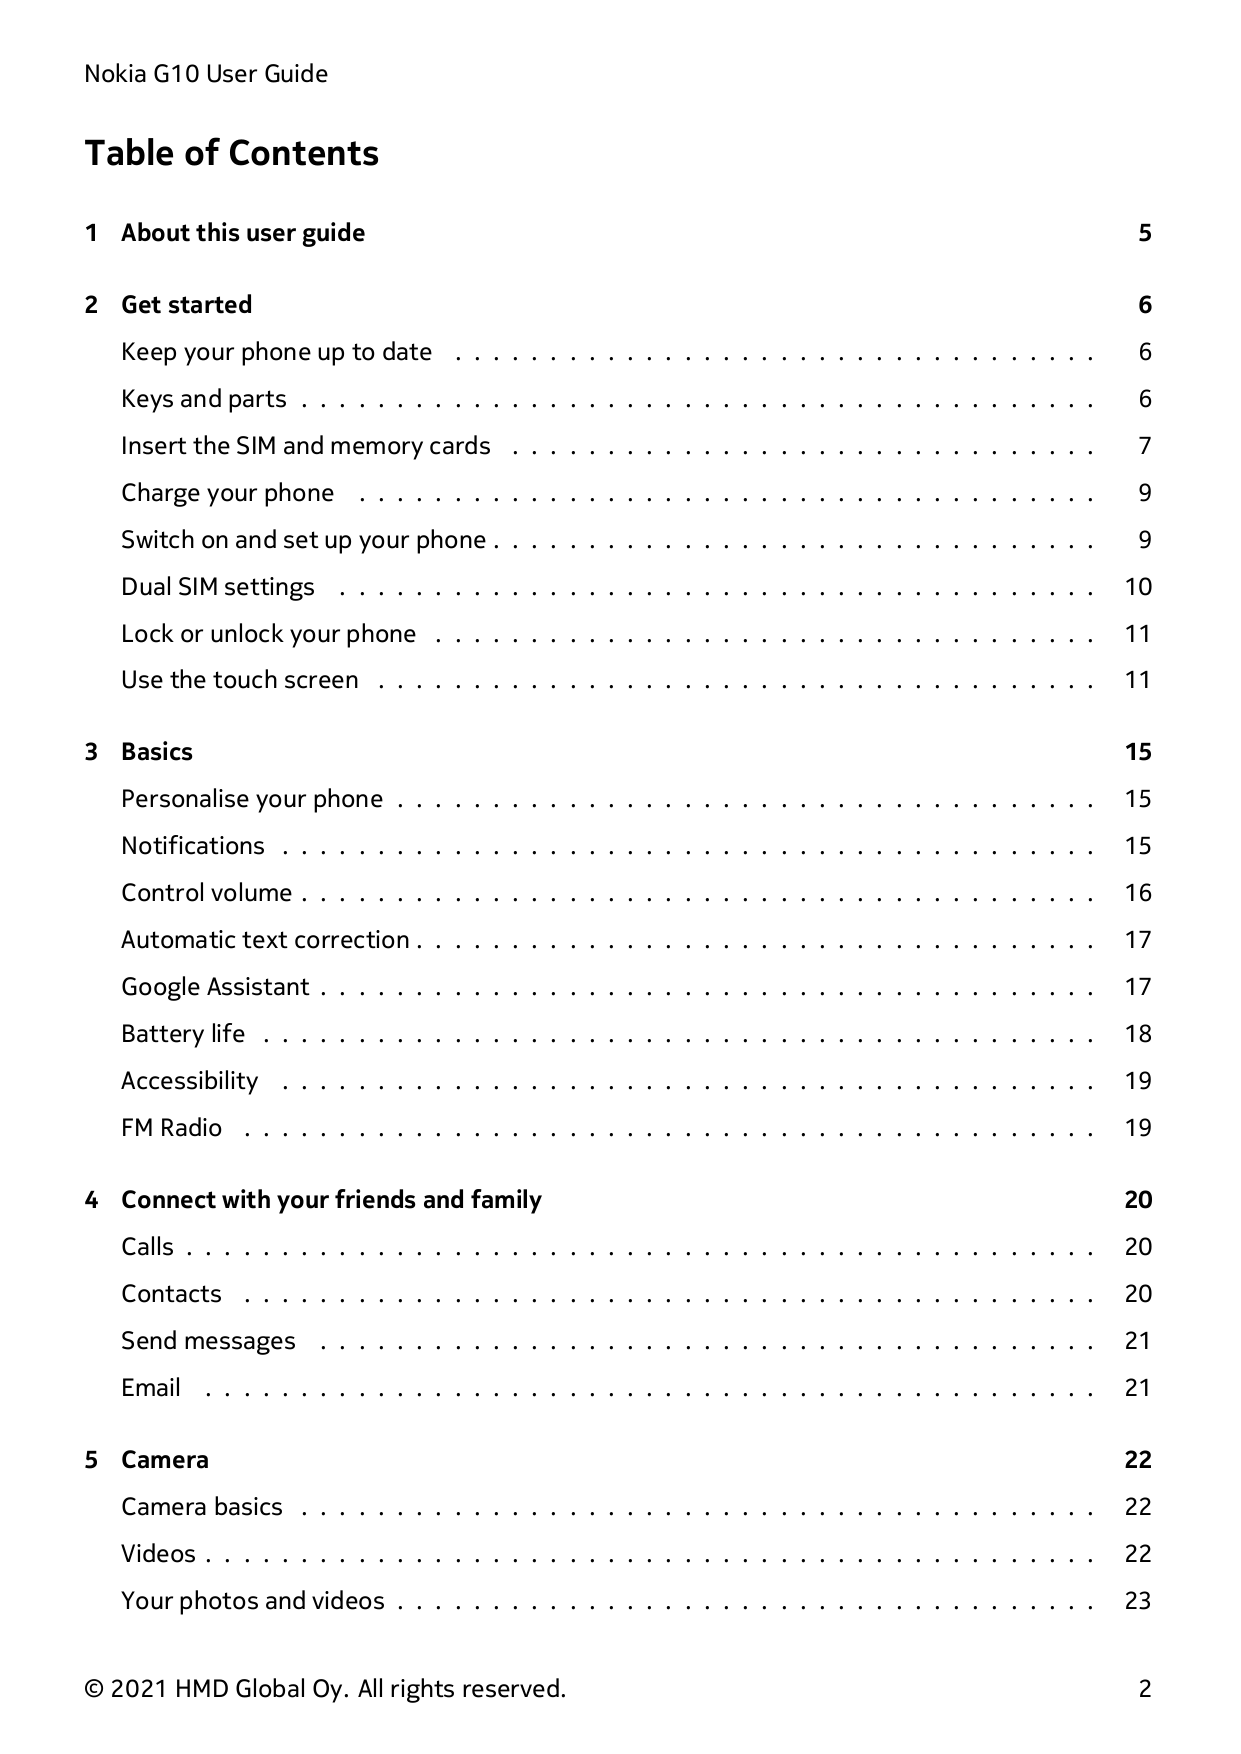 Nokia G10 User GuideTable of Contents1 About this user guide52 Get started6Keep your phone up to date . . . . . . . . . . . . . 